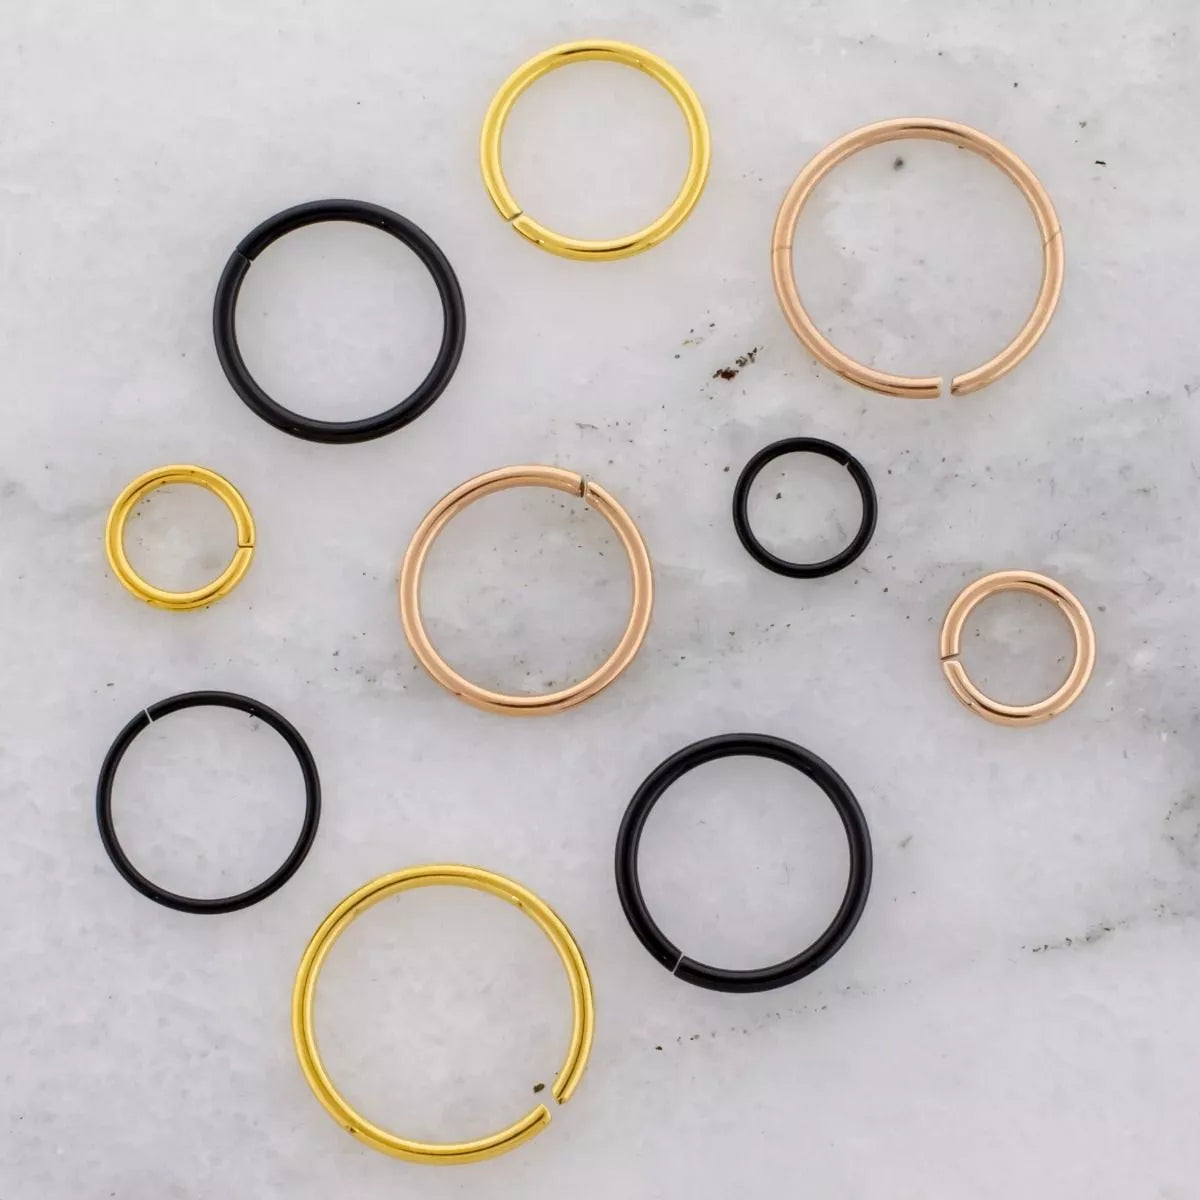 SEAMLESS RING Rose Gold PVD Bendable Seamless Ring Bendable Ring - 1 Piece #SPLT#6 -Rebel Bod-RebelBod